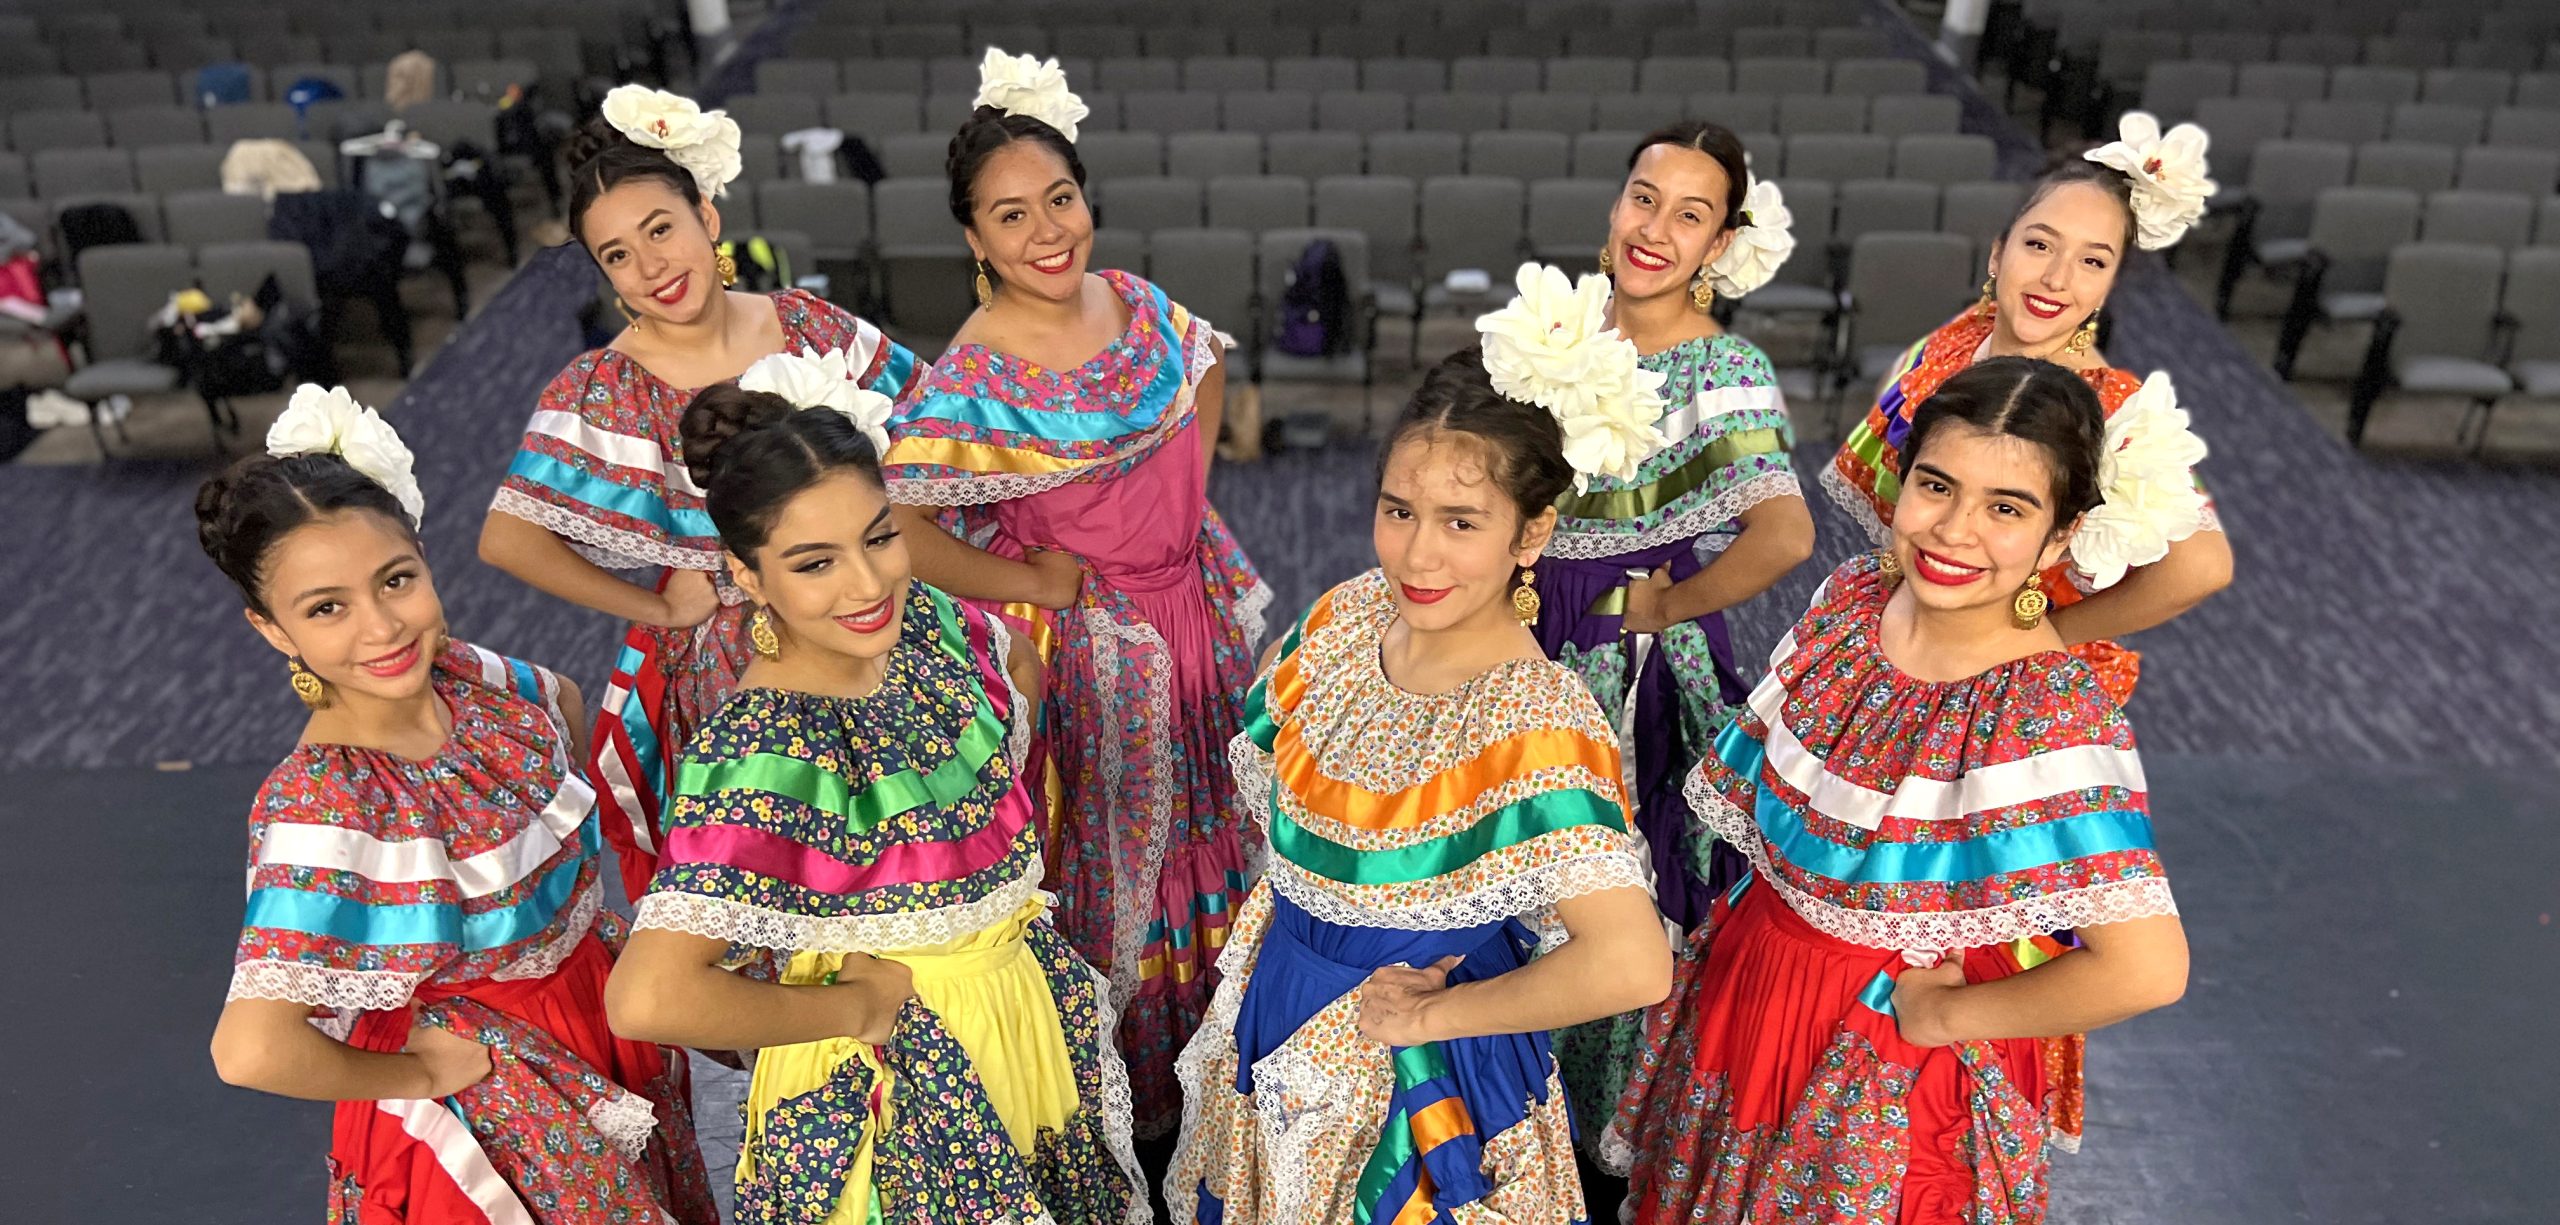 folklorico lessons near me